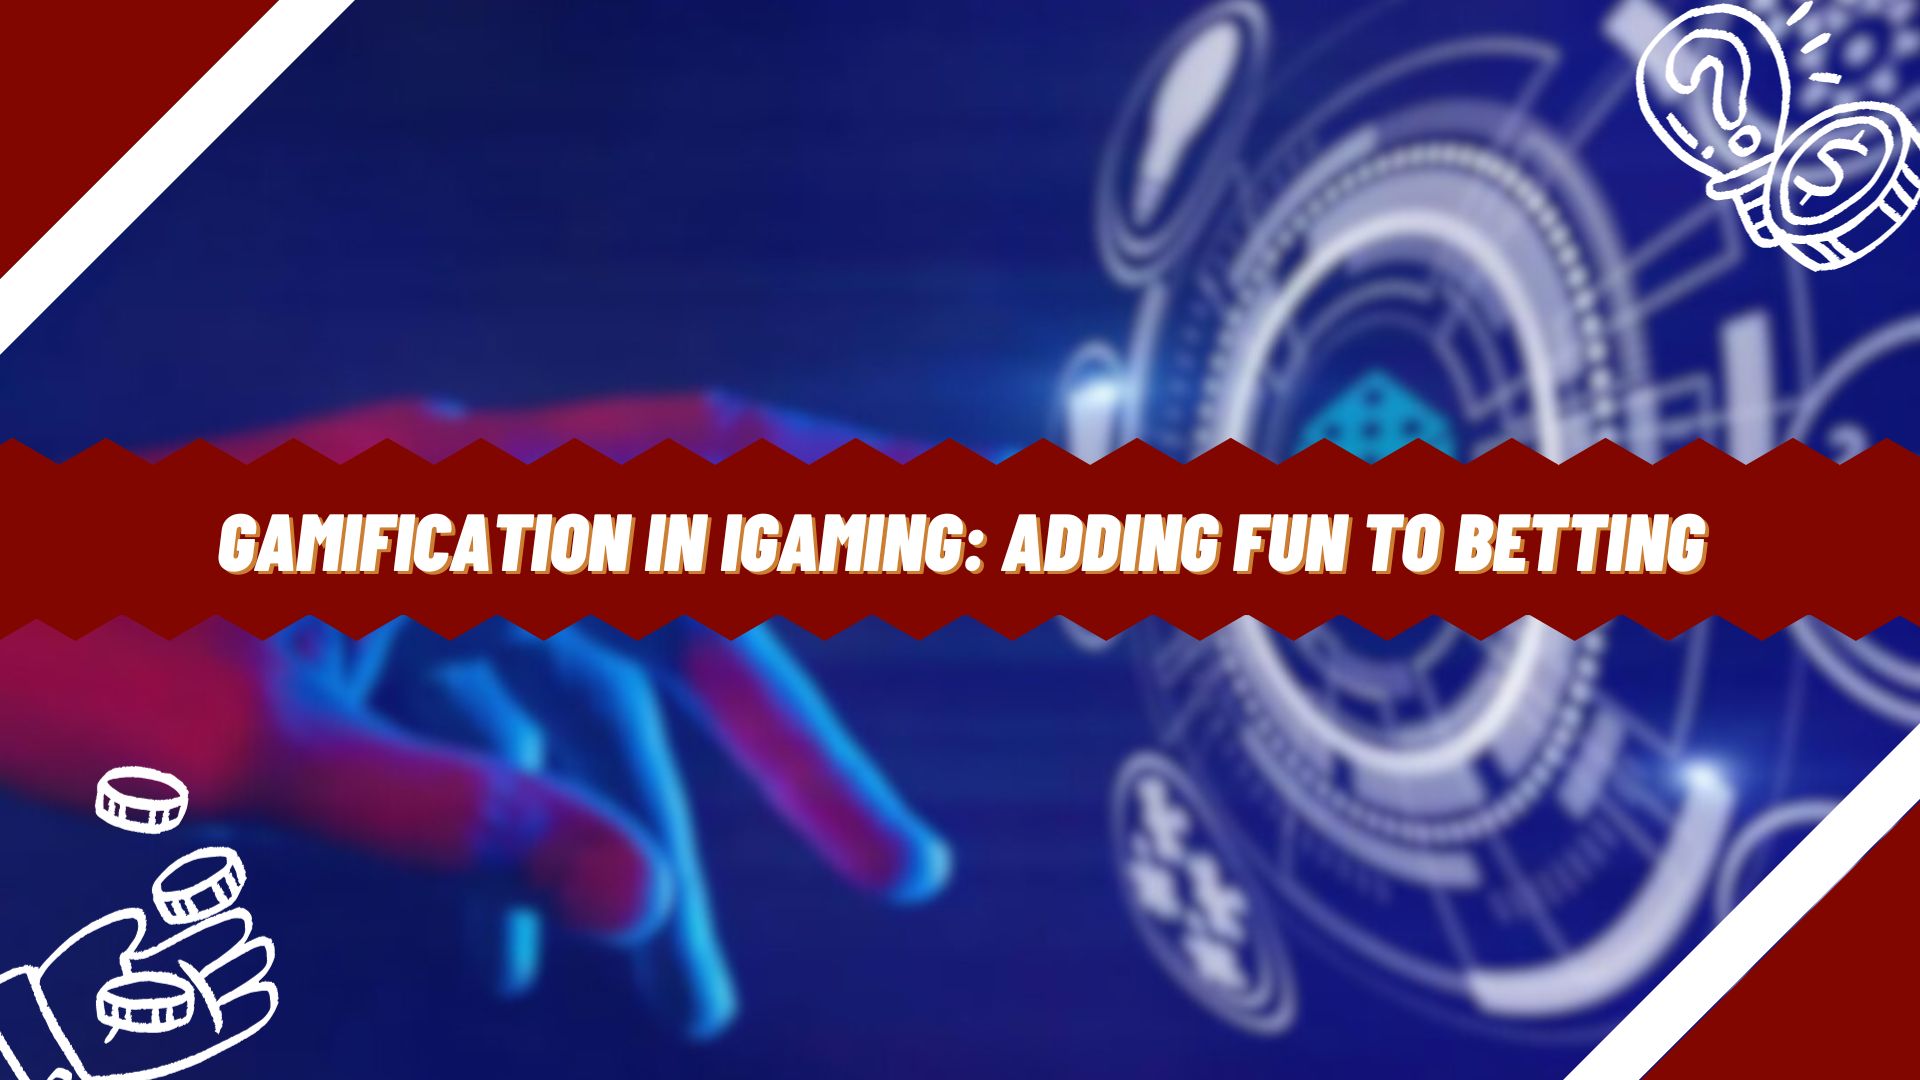 Gamification in iGaming: Adding Fun to Betting